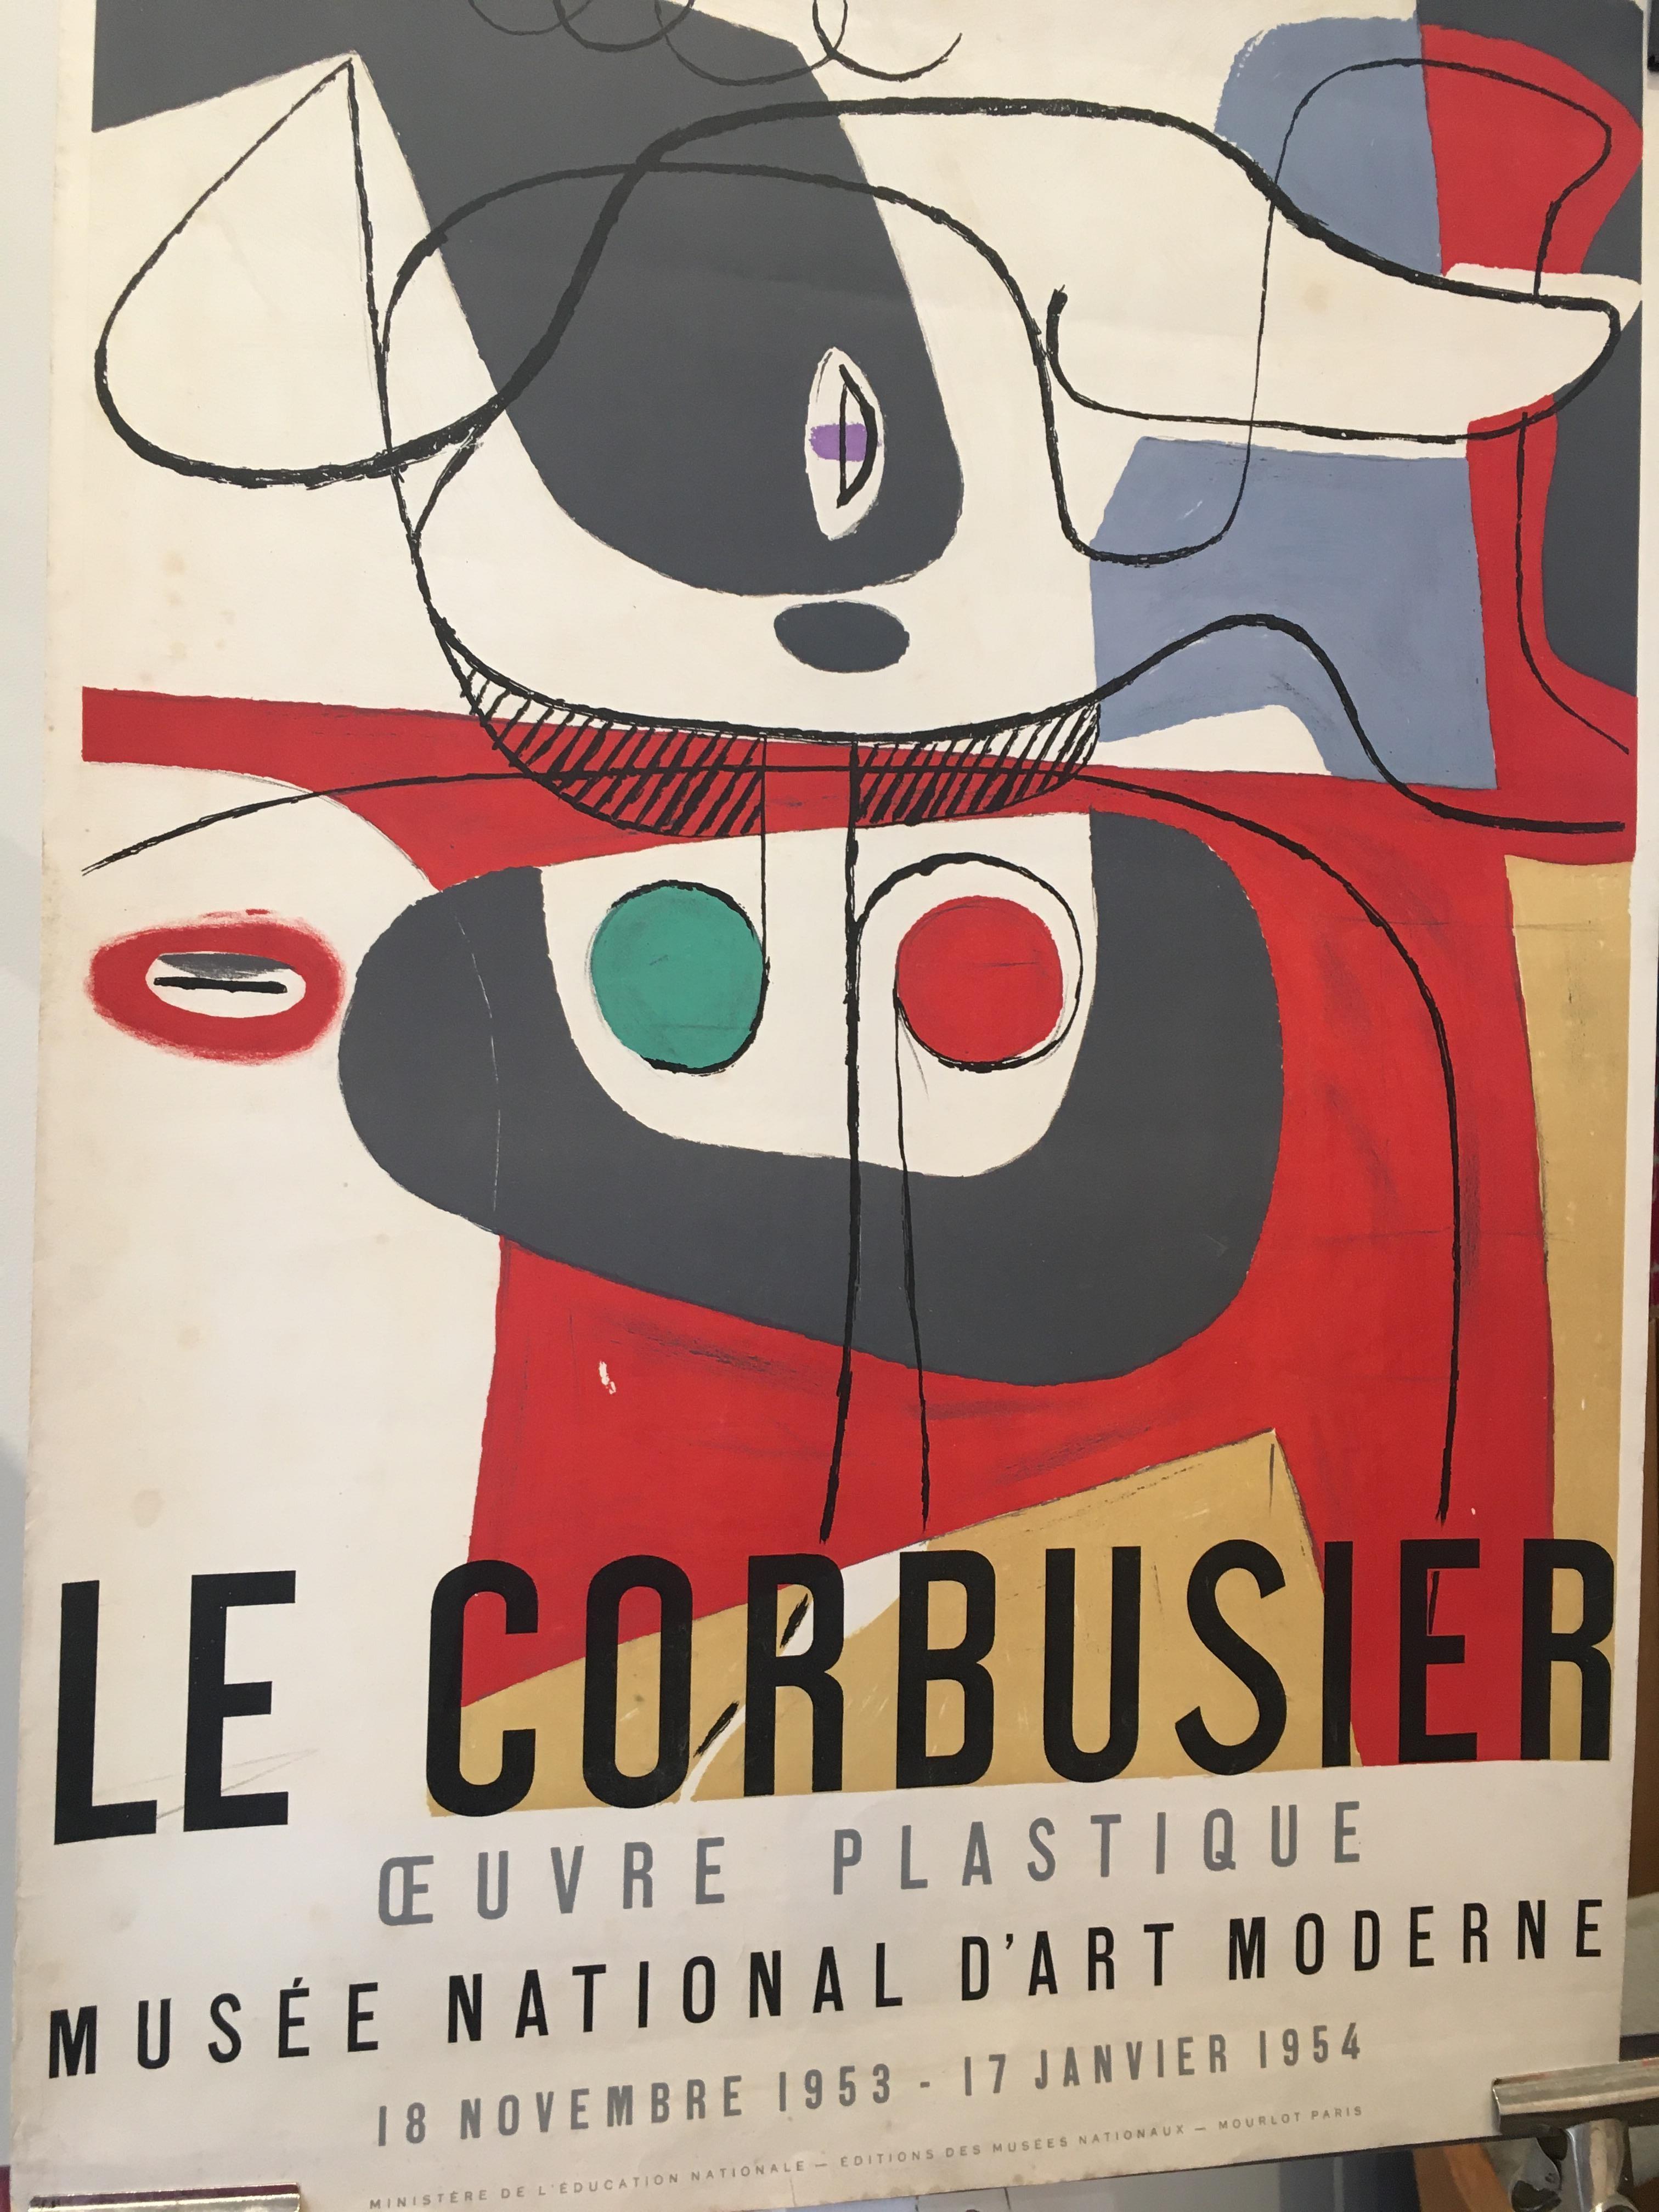 Original Exhibition Poster, Le Corbusier- 'Musee National D’art Moderne', 1953

Charles-Édouard Jeanneret, known as Le Corbusier, was a Swiss-French architect, designer, painter, urban planner, writer, and one of the pioneers of what is now